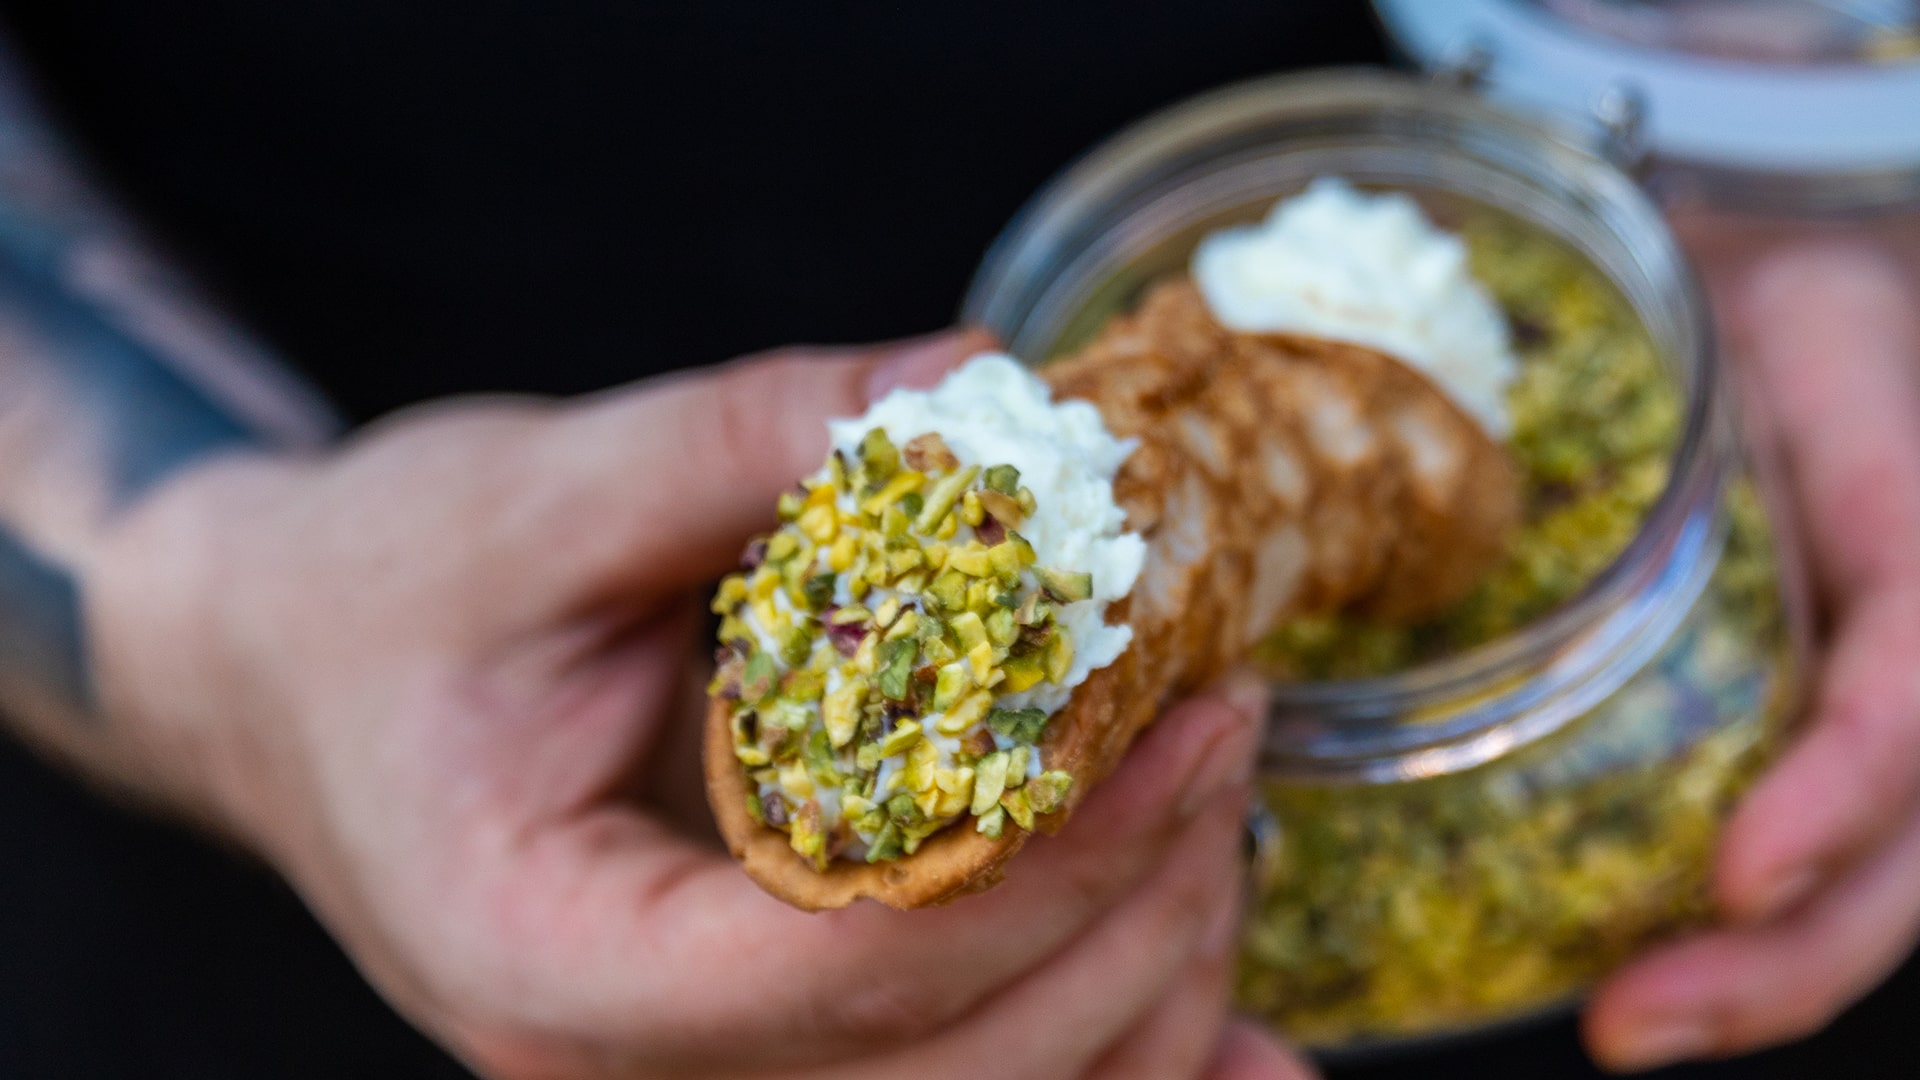 Cannolo Pastry 101 | What are Cannoli? 